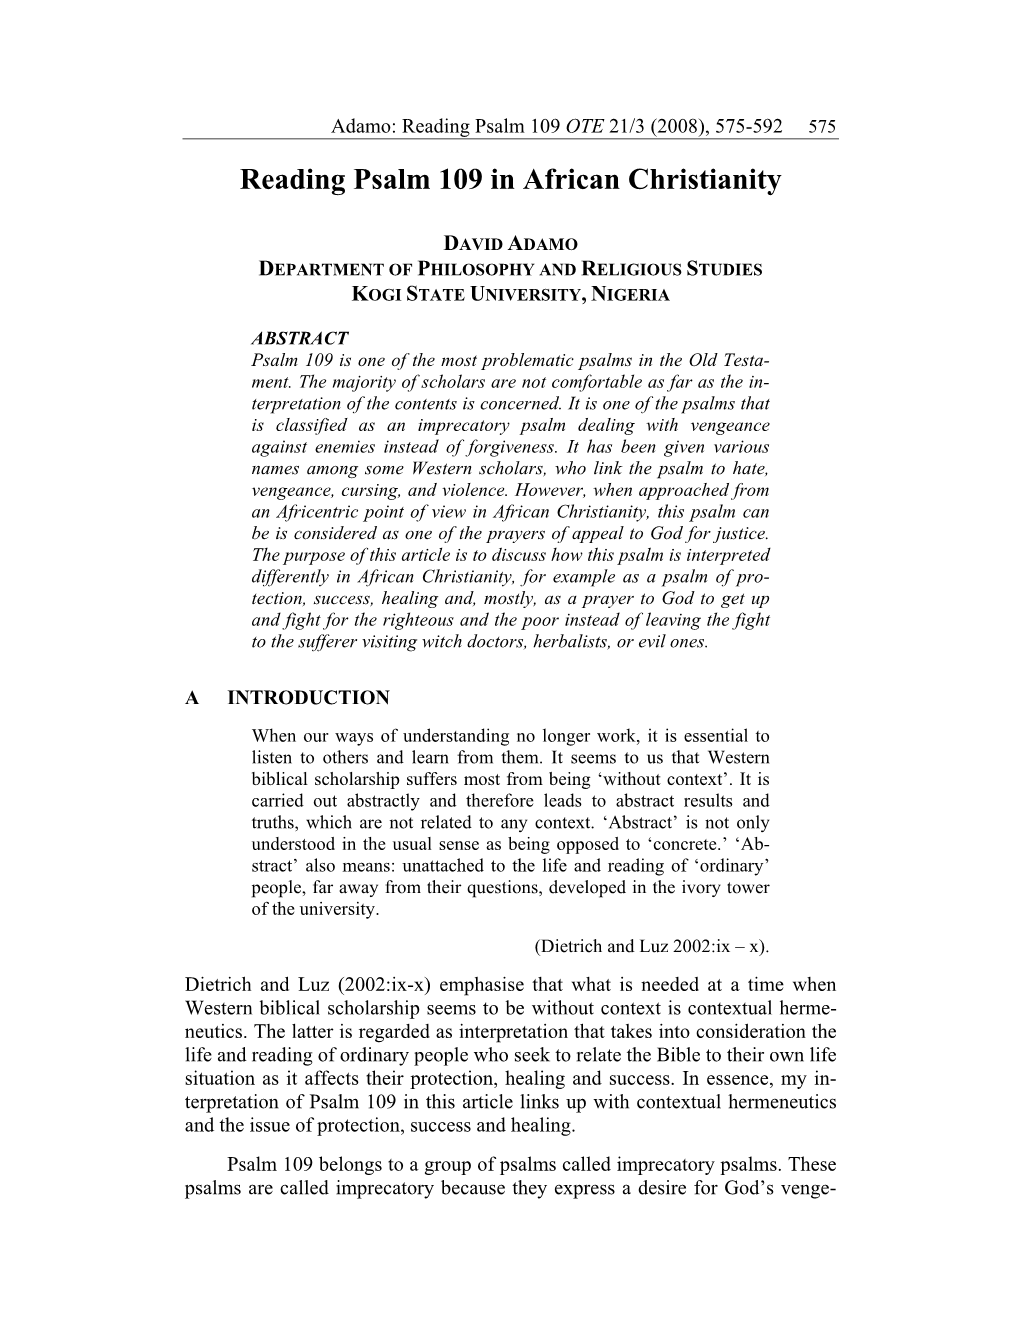 Reading Psalm 109 in African Christianity